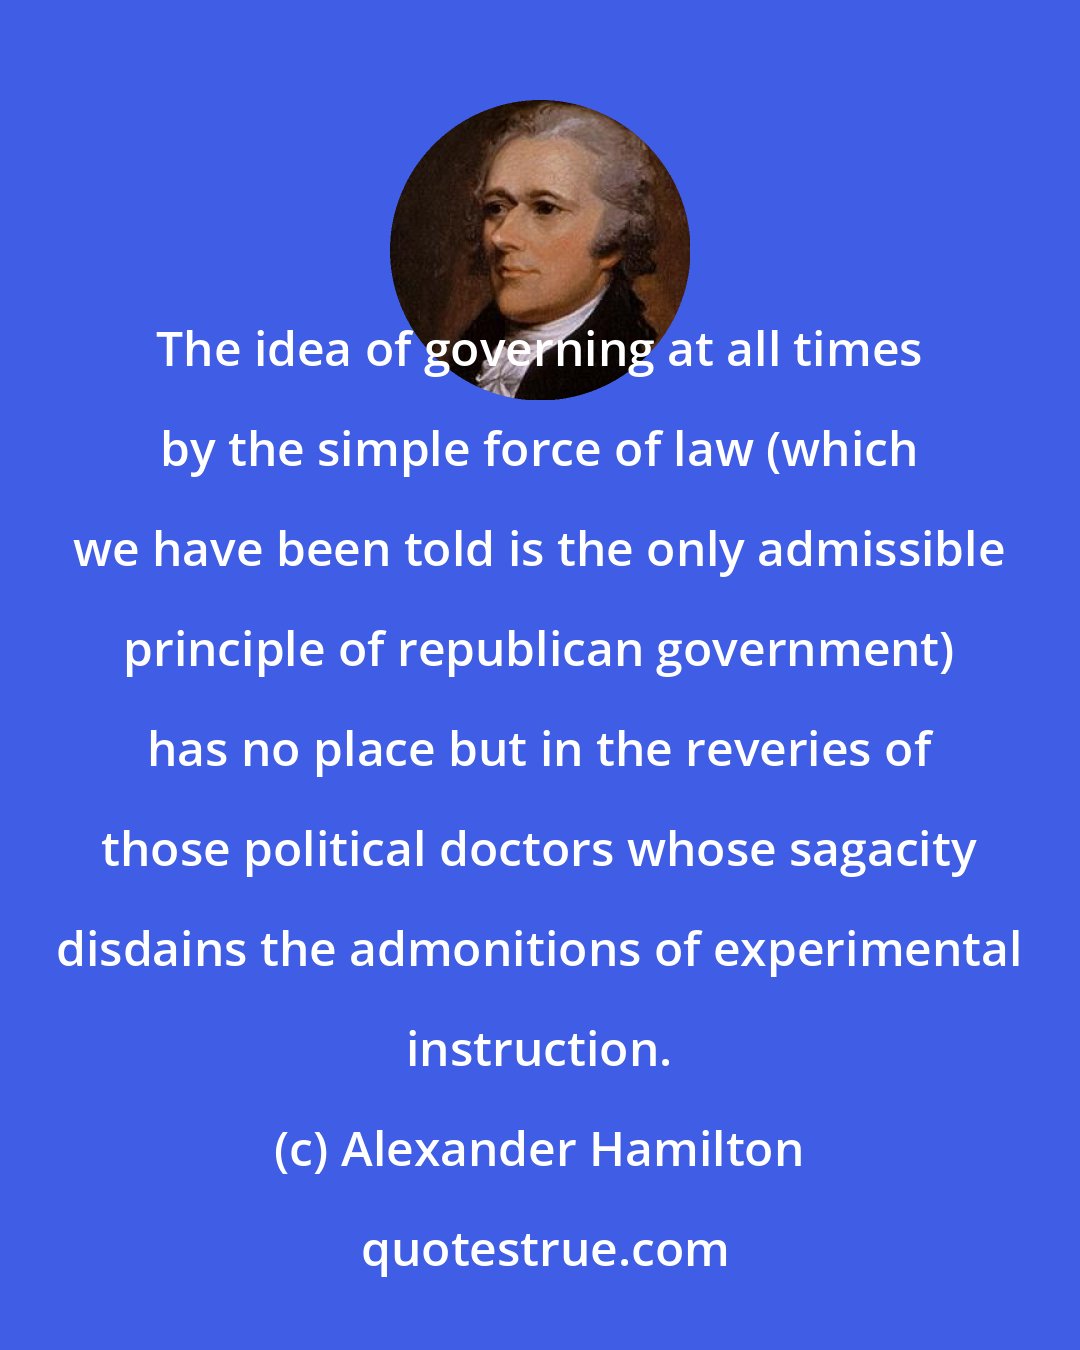 Alexander Hamilton: The idea of governing at all times by the simple force of law (which we have been told is the only admissible principle of republican government) has no place but in the reveries of those political doctors whose sagacity disdains the admonitions of experimental instruction.